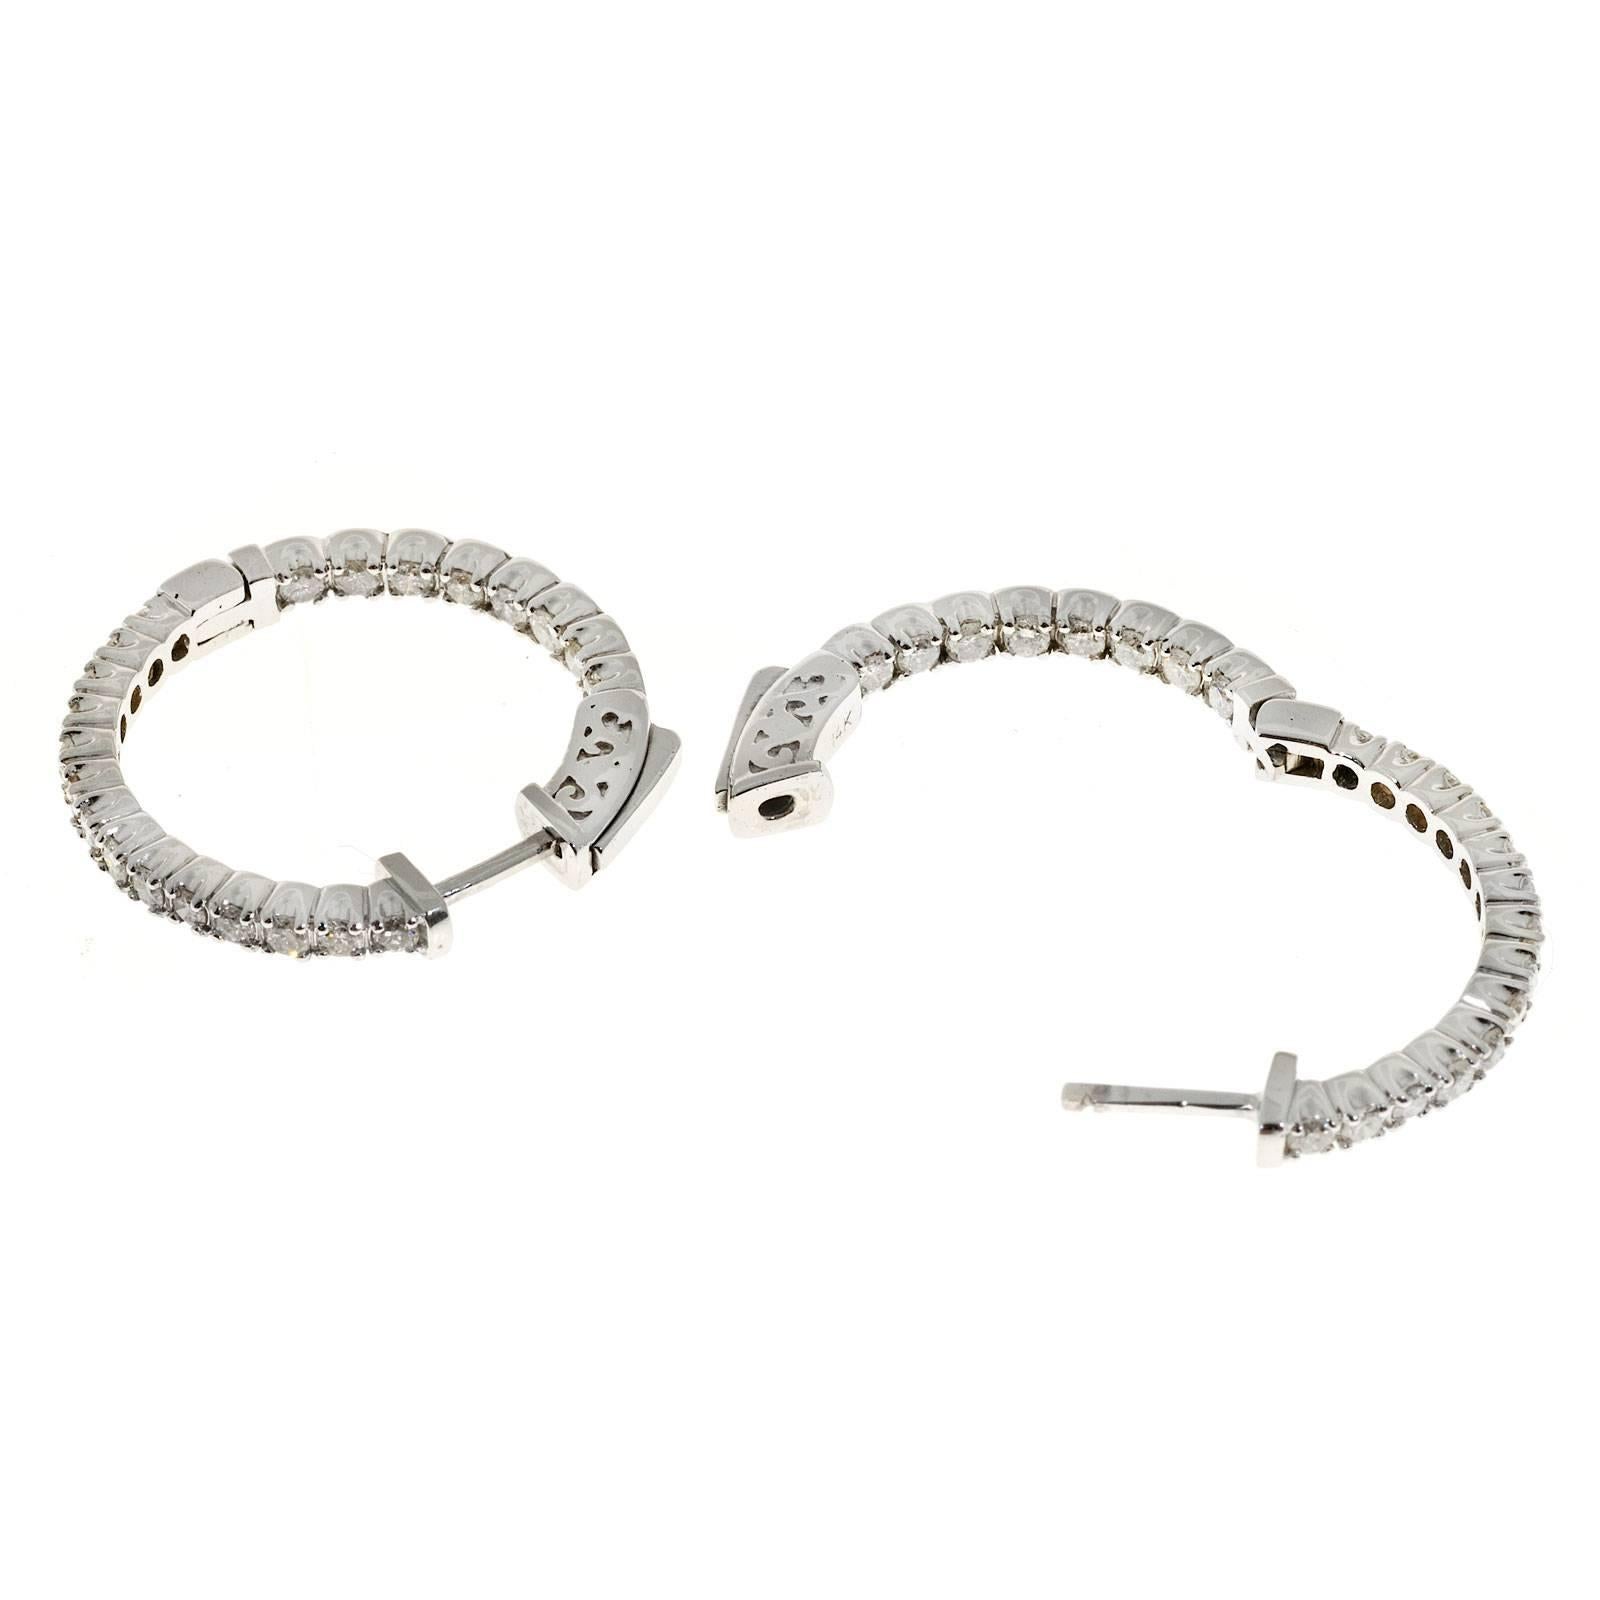 Inside out 14k white gold hoop earrings with secure spring loaded tops.

44 round diamonds, approx. total weight .90cts, H, SI1
14k white gold
Tested and stamped: 14k
7.0 grams
Top to bottom: 24.71mm or .97 inch
Width: 2.64mm or .10